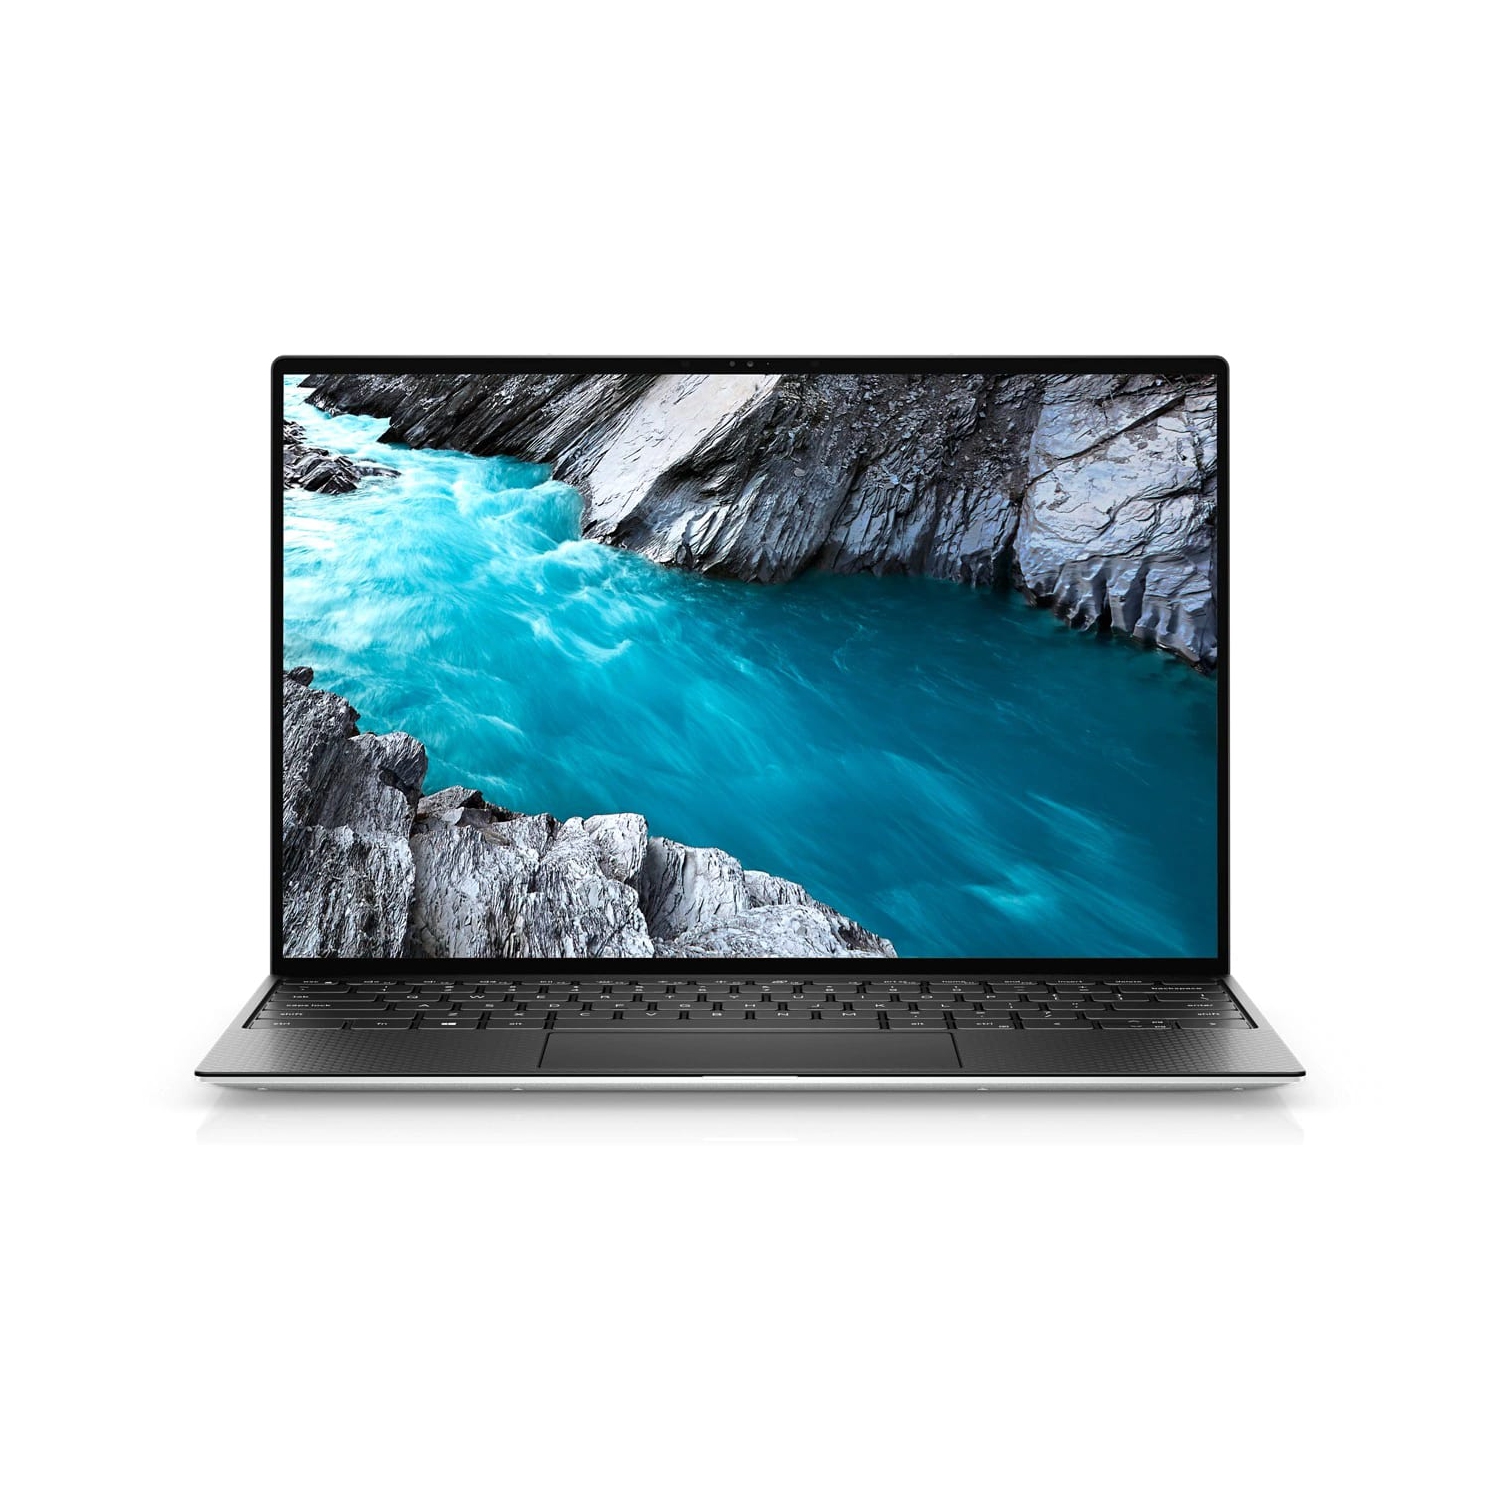 Refurbished (Excellent) - Dell XPS 13 9310 Laptop (2020) | 13.4" FHD+ Touch | Core i7 - 512GB SSD - 16GB RAM | 4 Cores @ 4.7 GHz - 11th Gen CPU Certified Refurbished